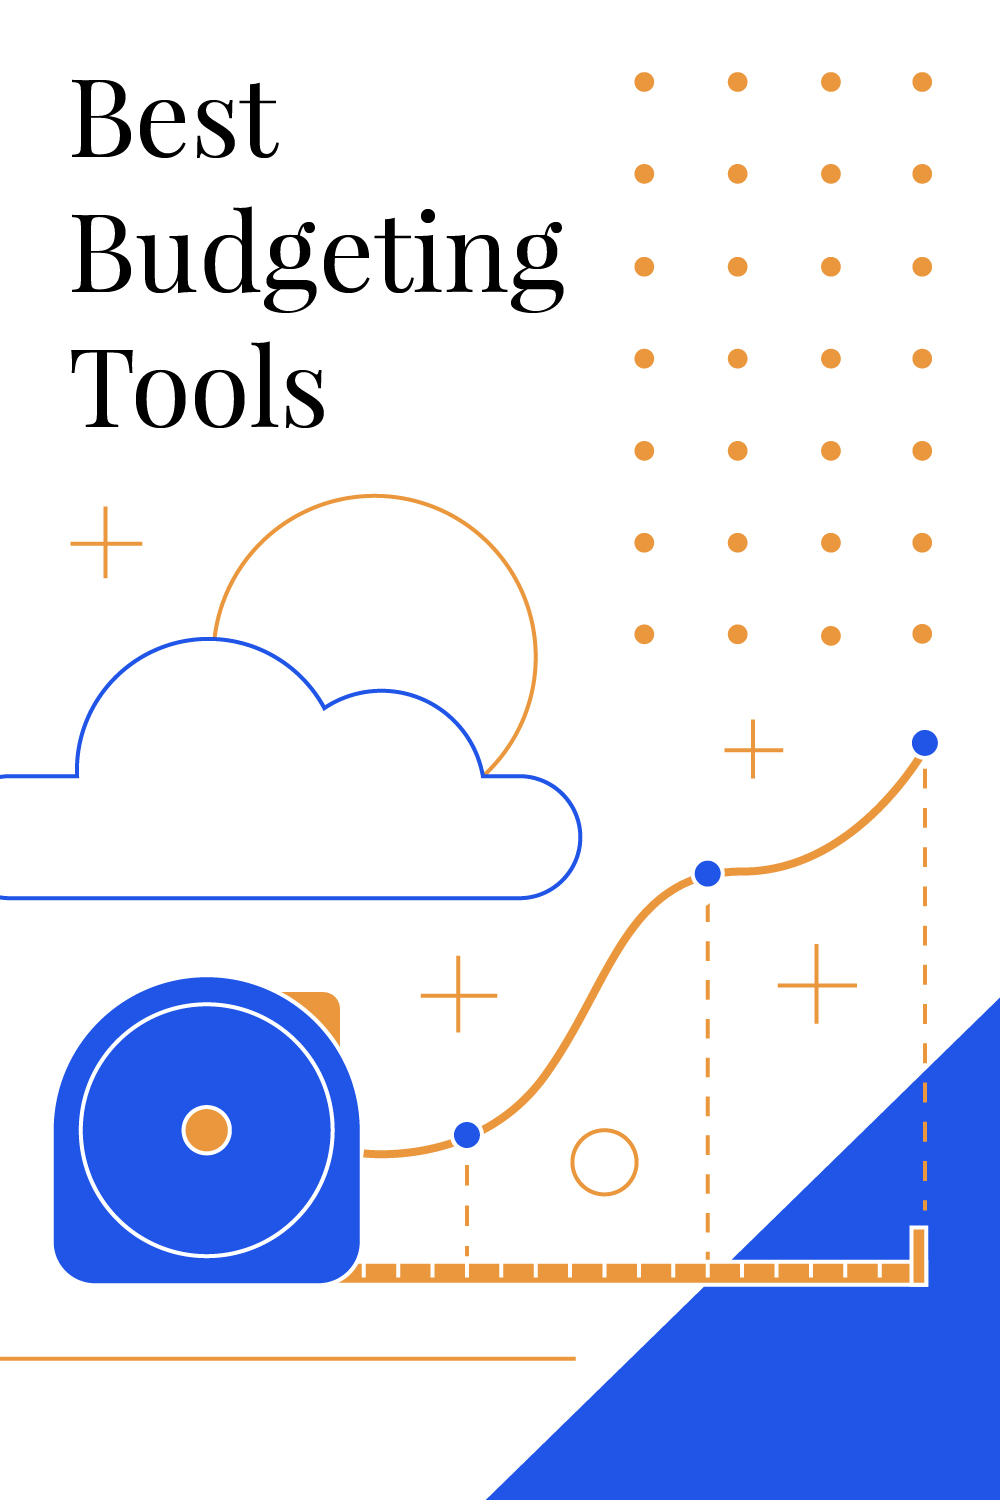 Best Budgeting Tools Based On Your Personality